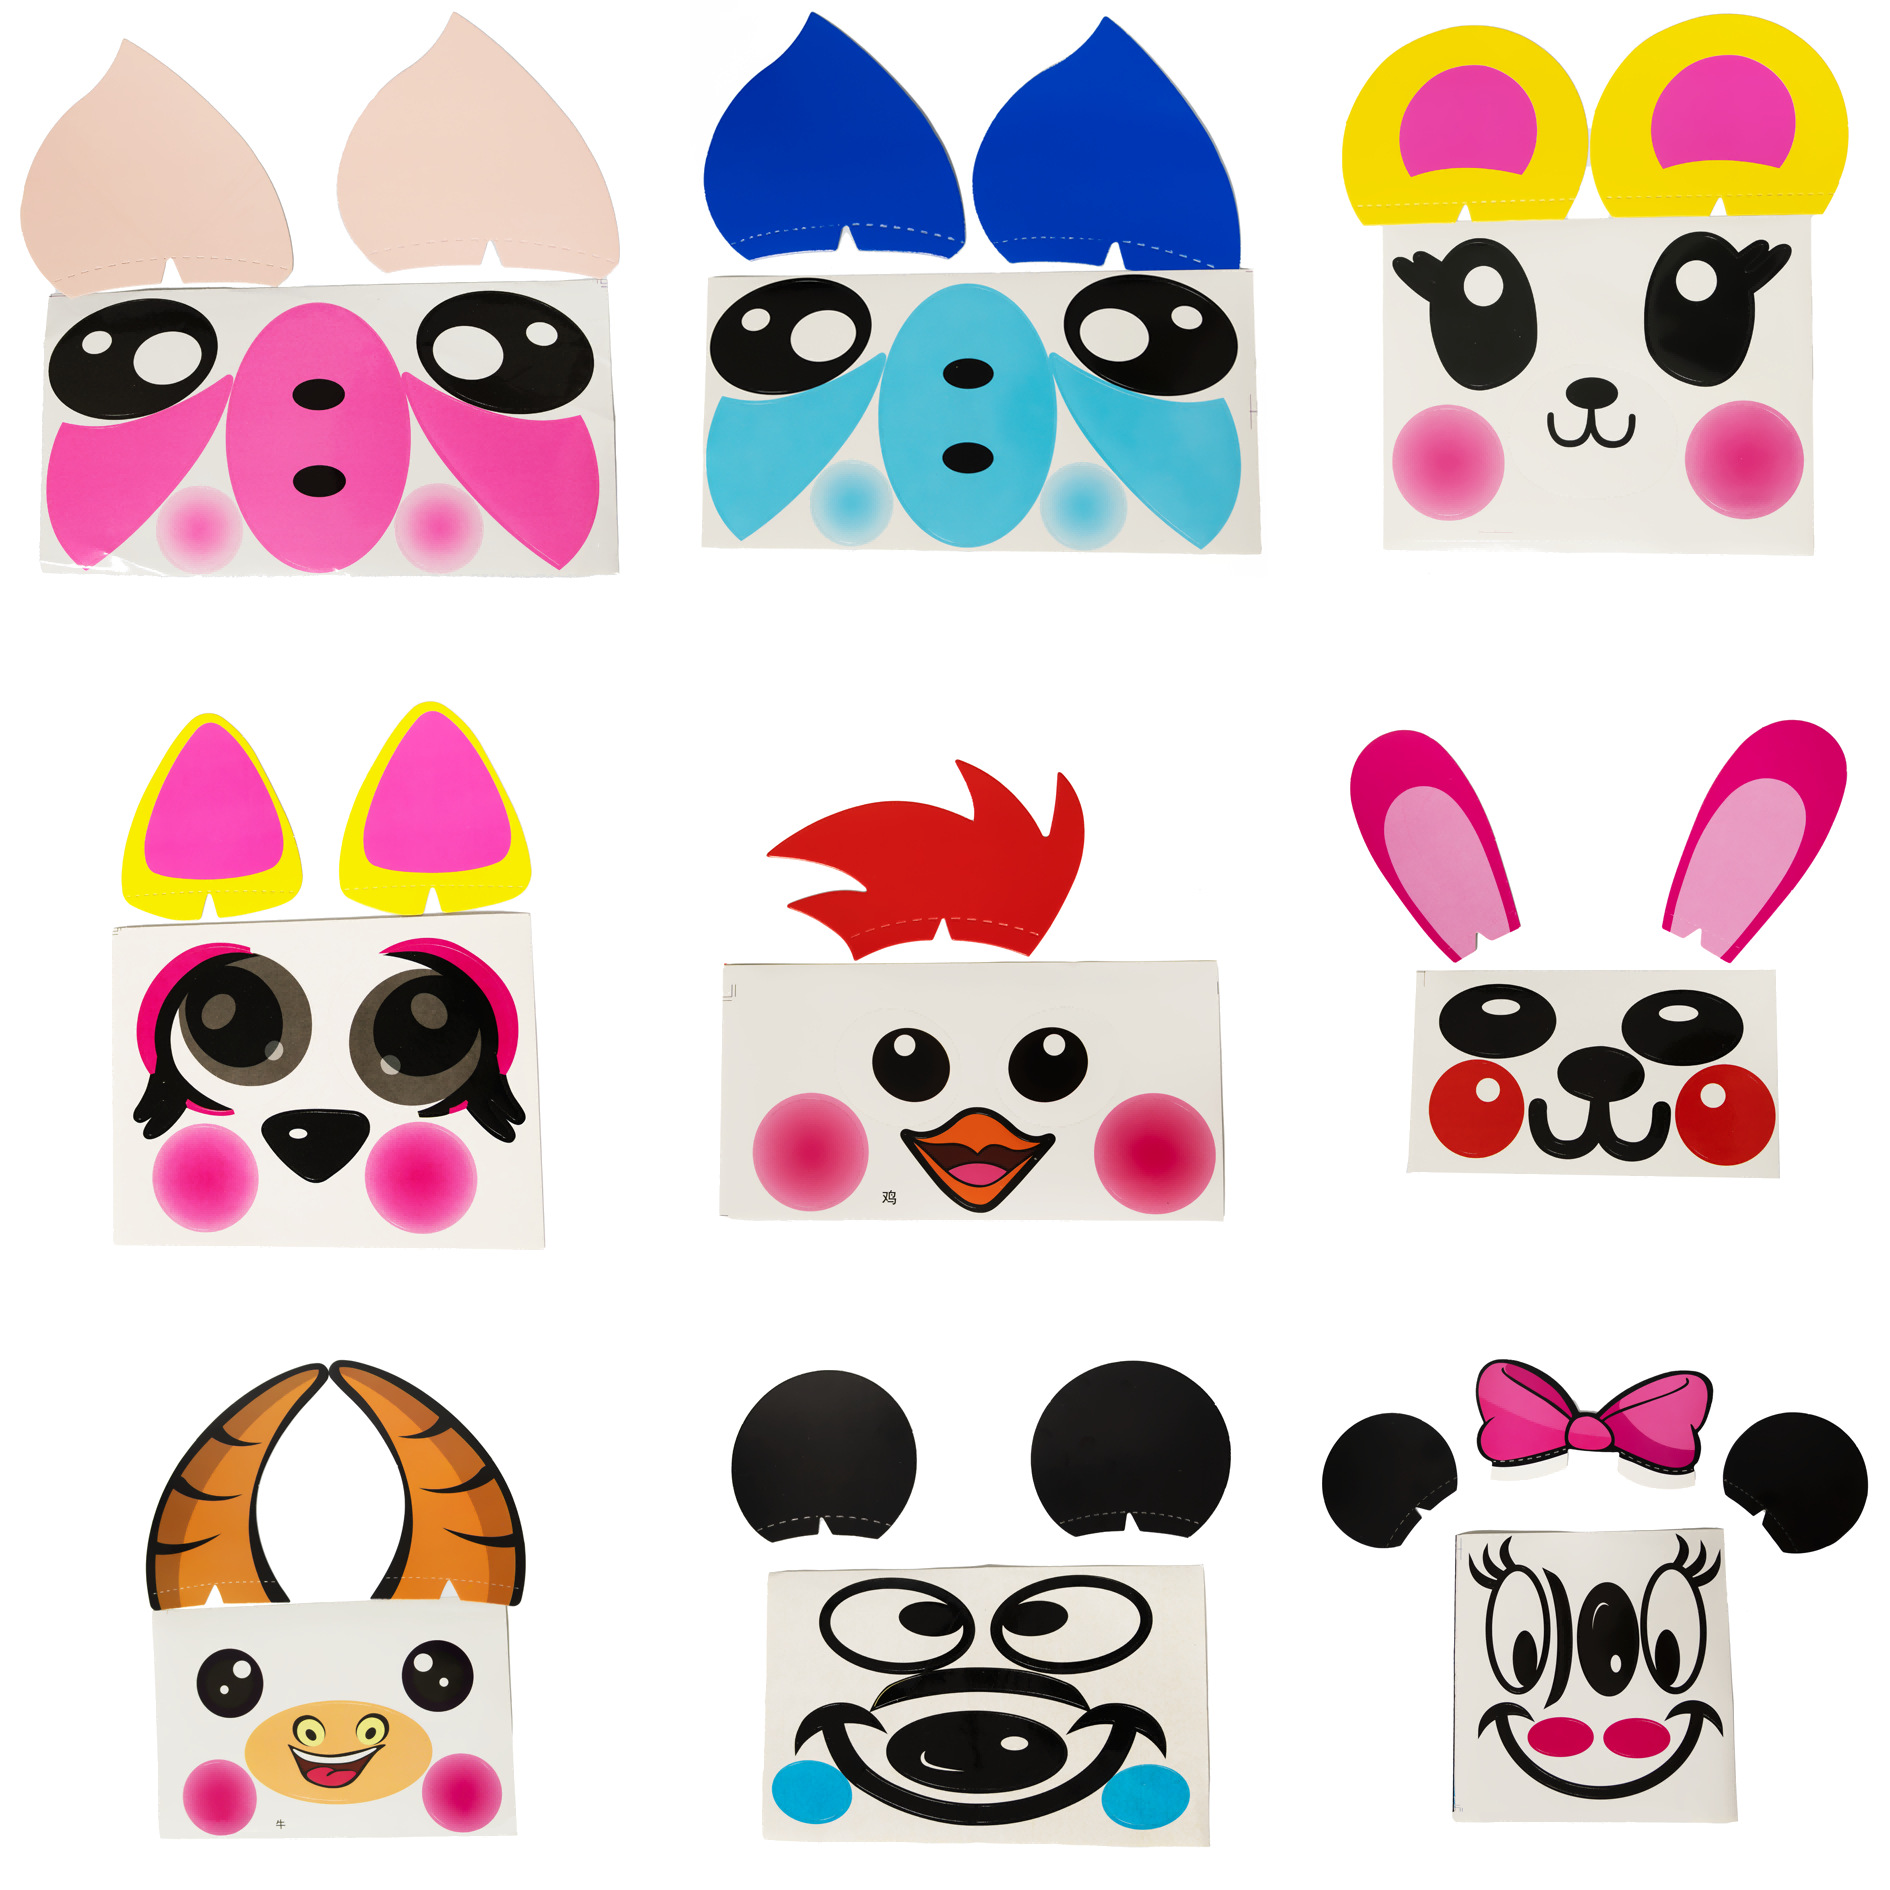 bounce ball stickers large eye cartoon animal shape balloon small pink pig stickers mickey minnie sticker accessories